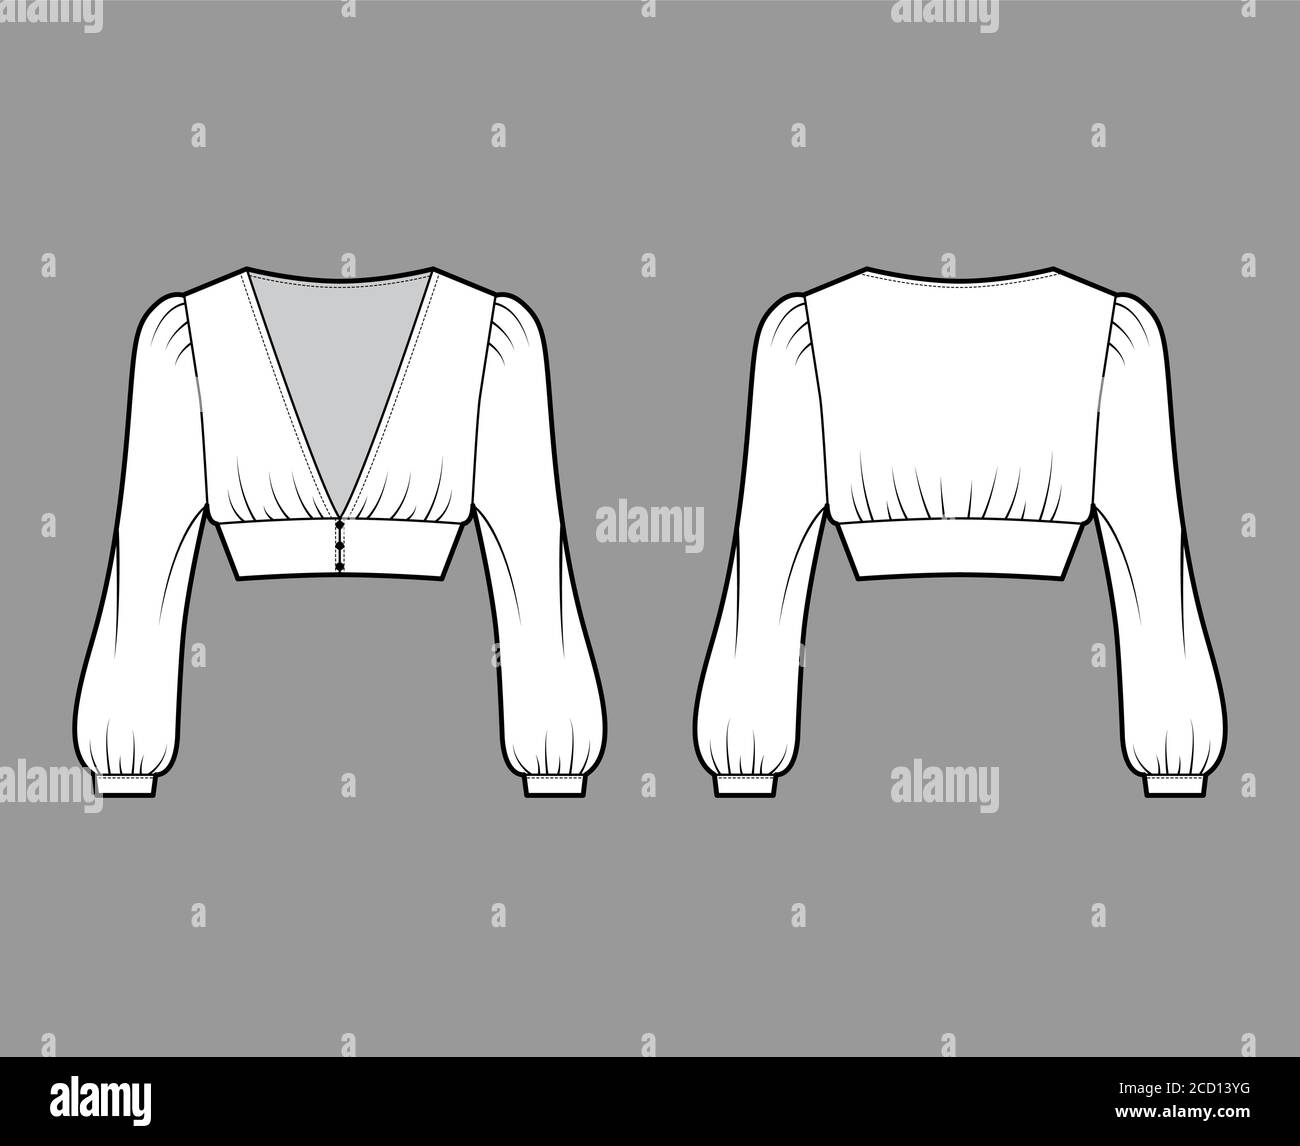 Cropped top technical fashion illustration with long bishop sleeves, puffed shoulders, front button fastenings. Flat apparel shirt template front back white color. Women men, unisex blouse CAD mockup Stock Vector